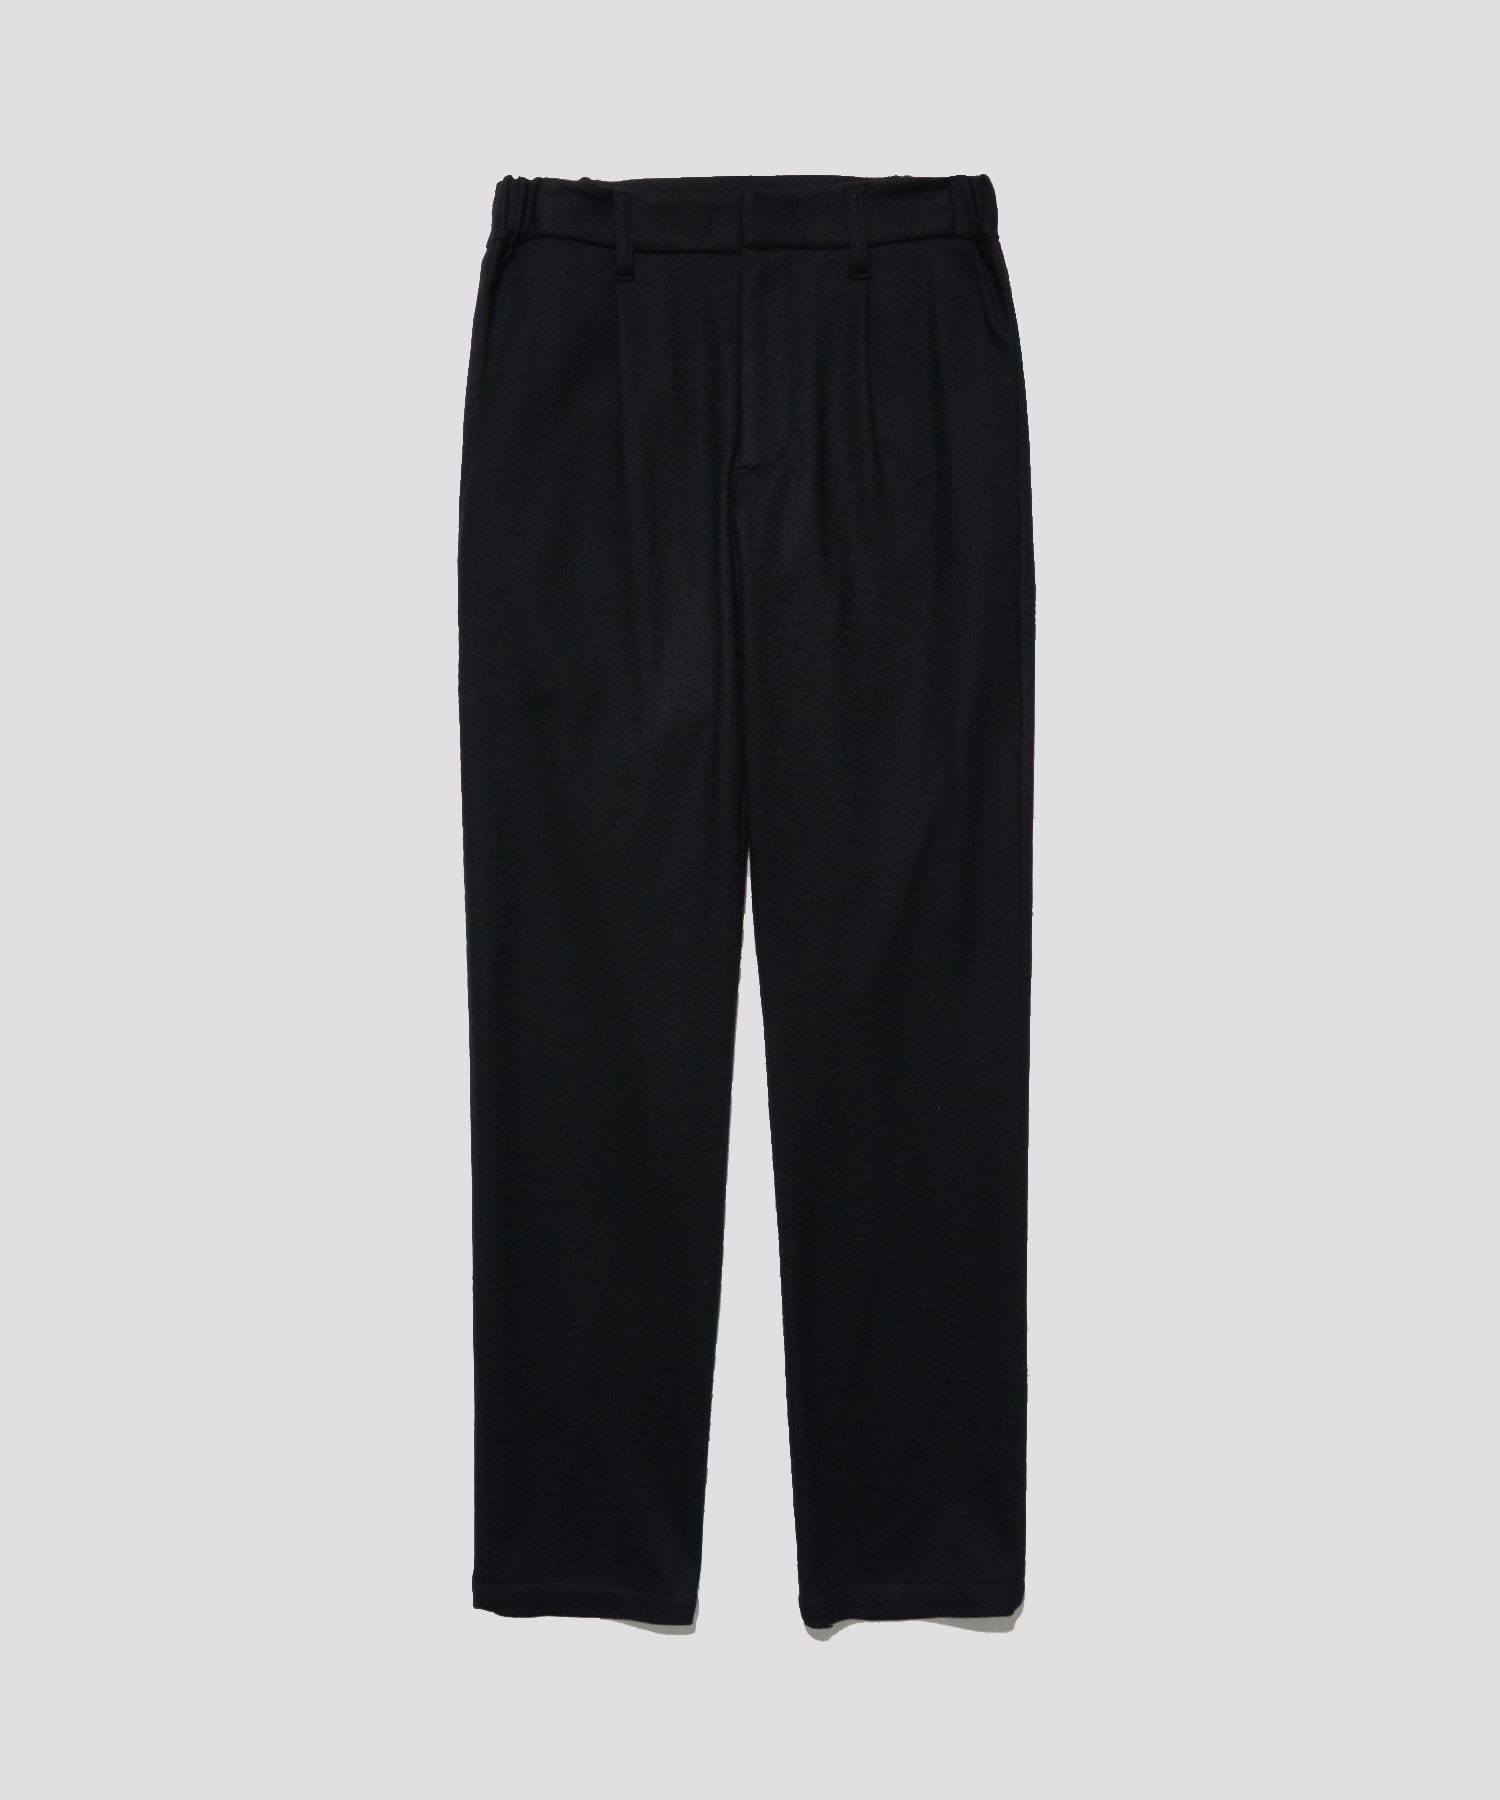 Flanne Lana Cashmere Touch Tapered Pants